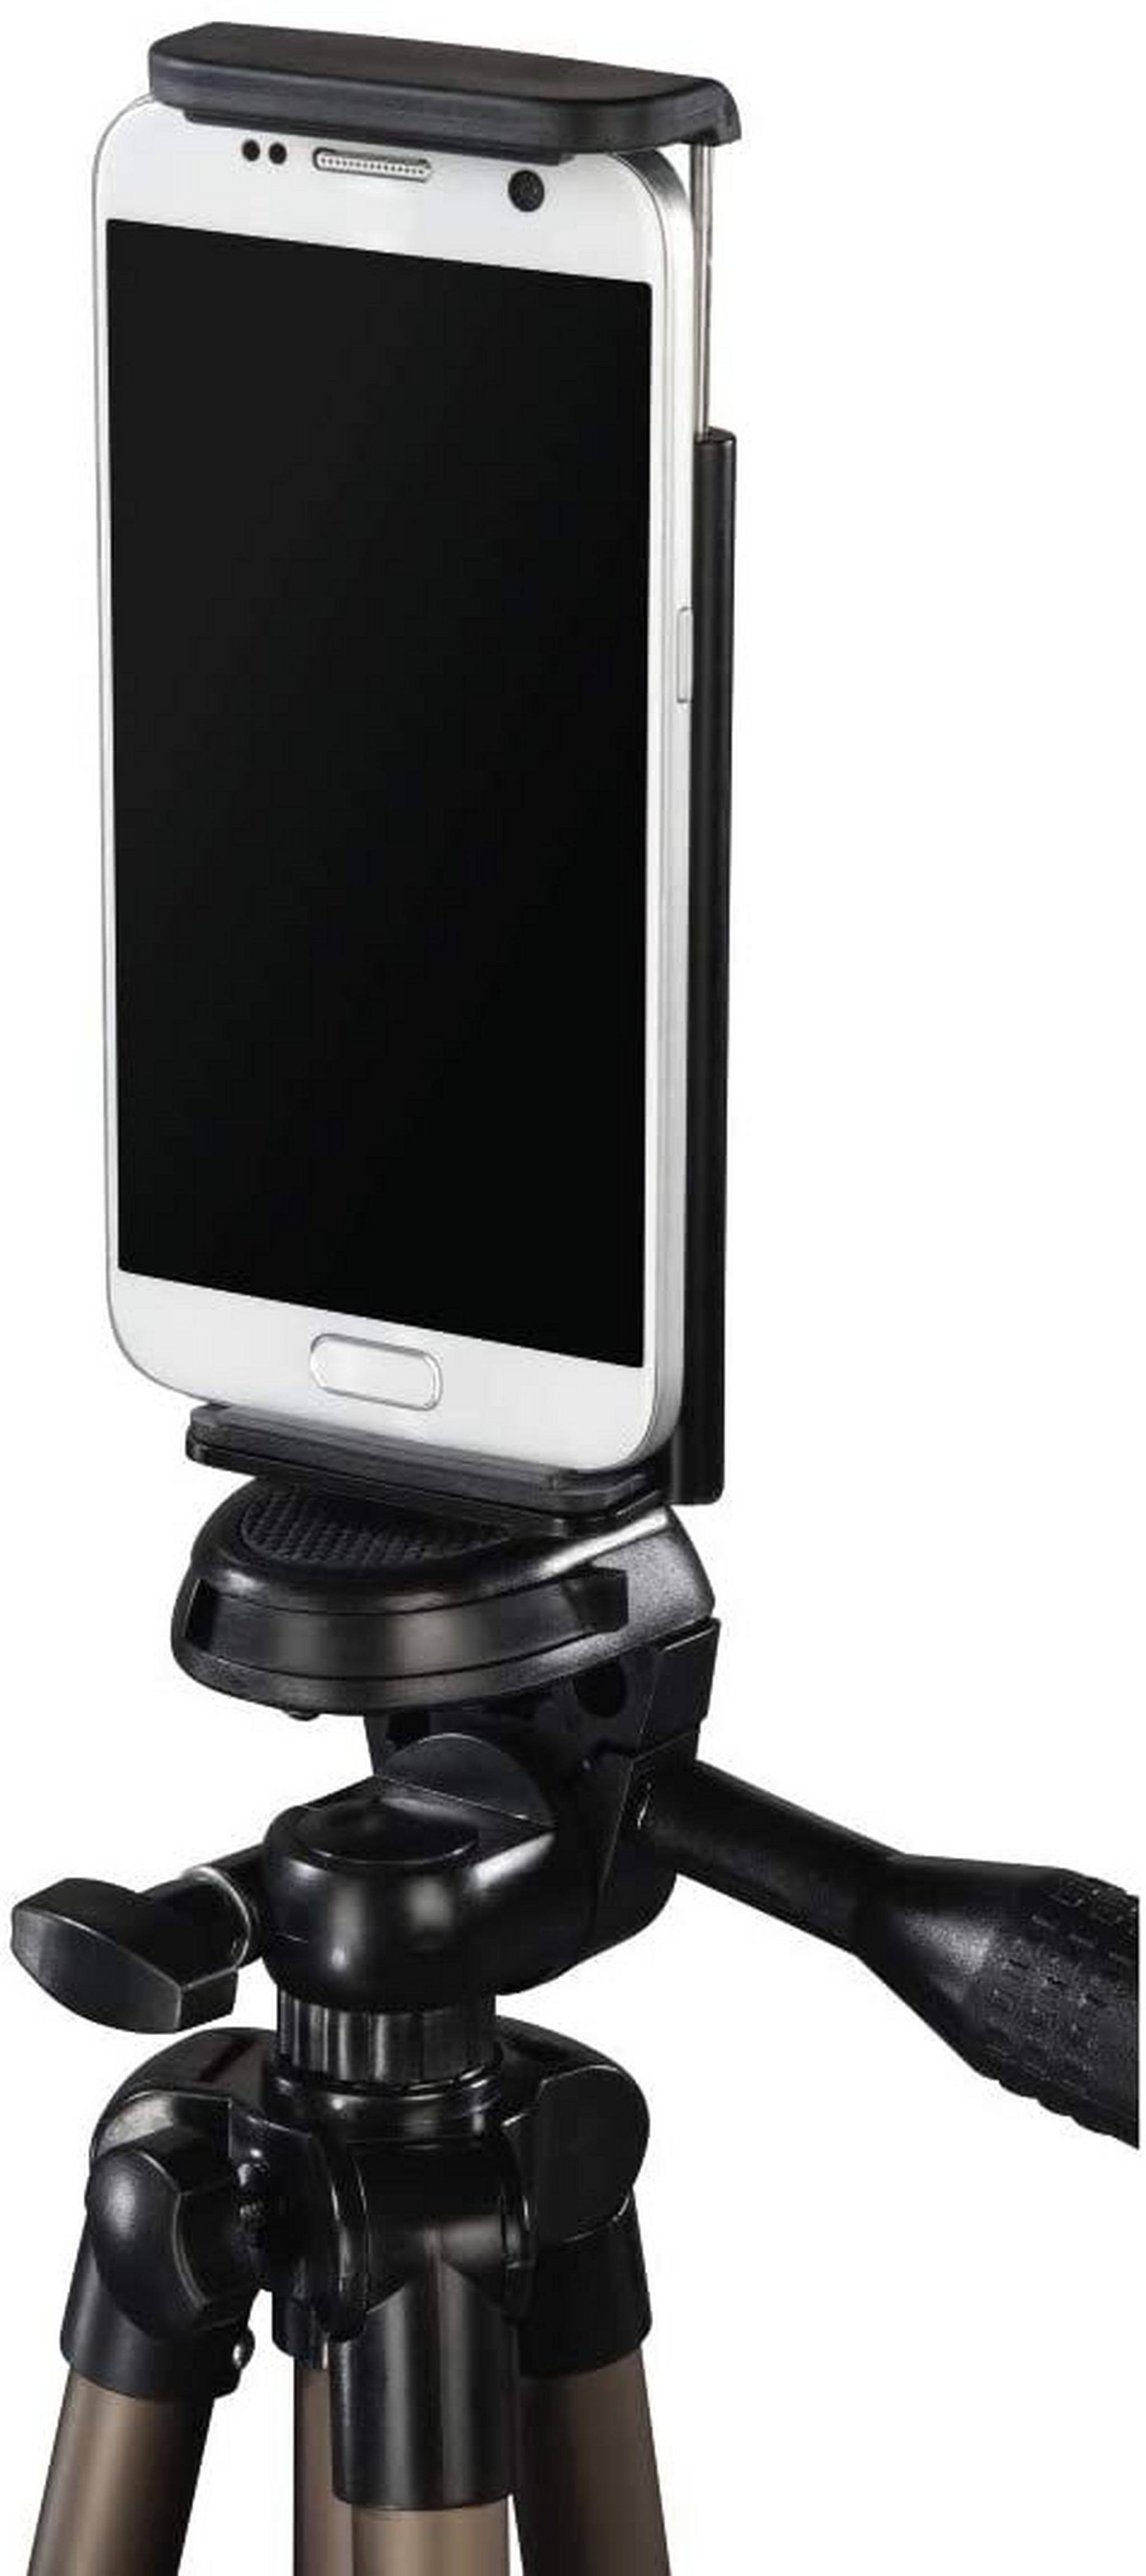 Hama Tripod for Smartphone/Tablet 106-3D - (4619)